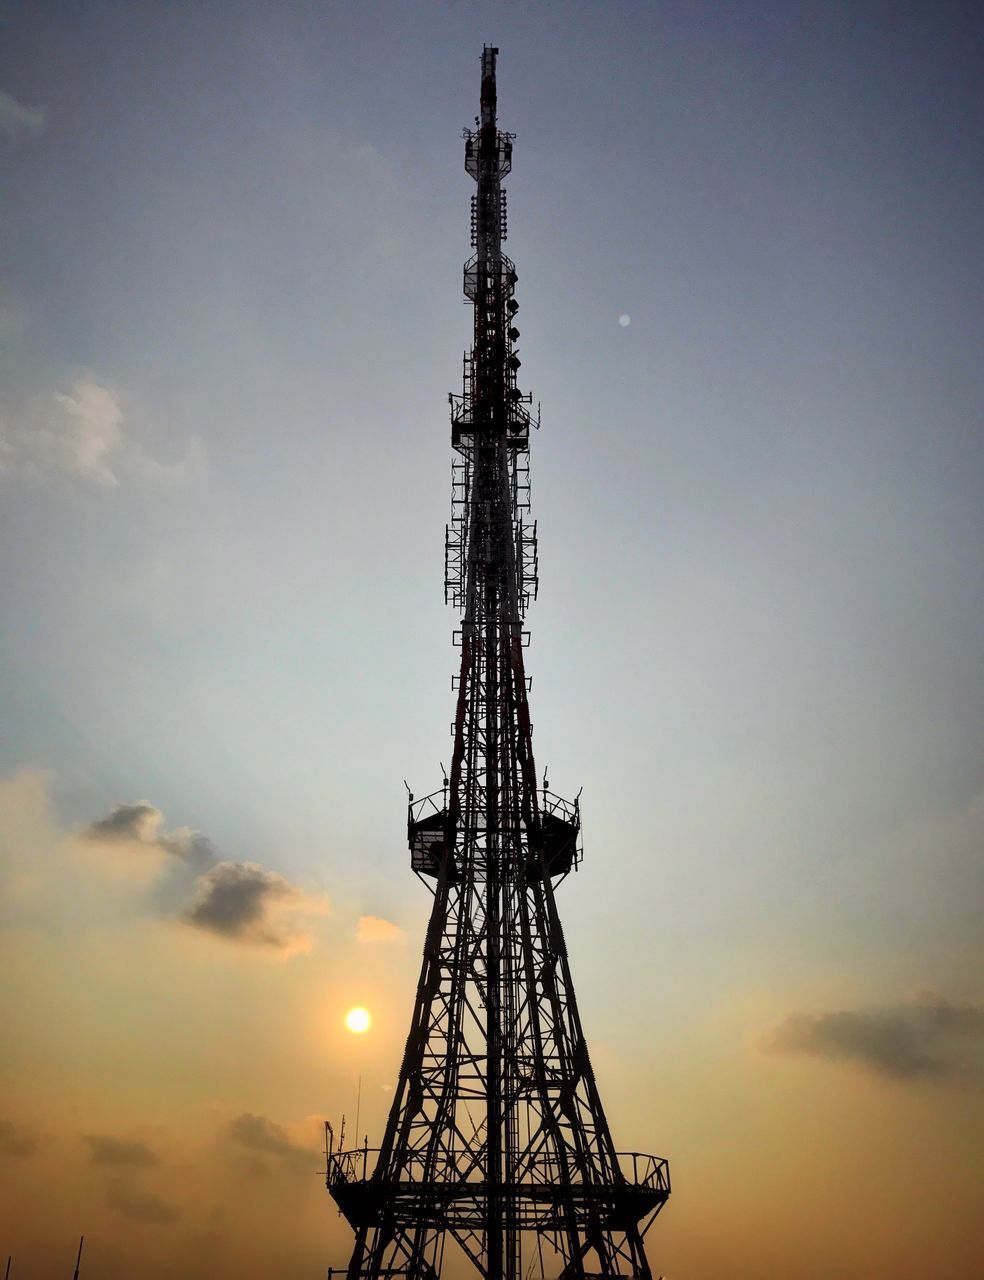 technology, tower, communication, tall - high, connection, metal, sky, sunset, telecommunications equipment, satellite dish, wireless technology, no people, low angle view, global communications, outdoors, cloud - sky, silhouette, antenna - aerial, architecture, built structure, day, nature, drilling rig